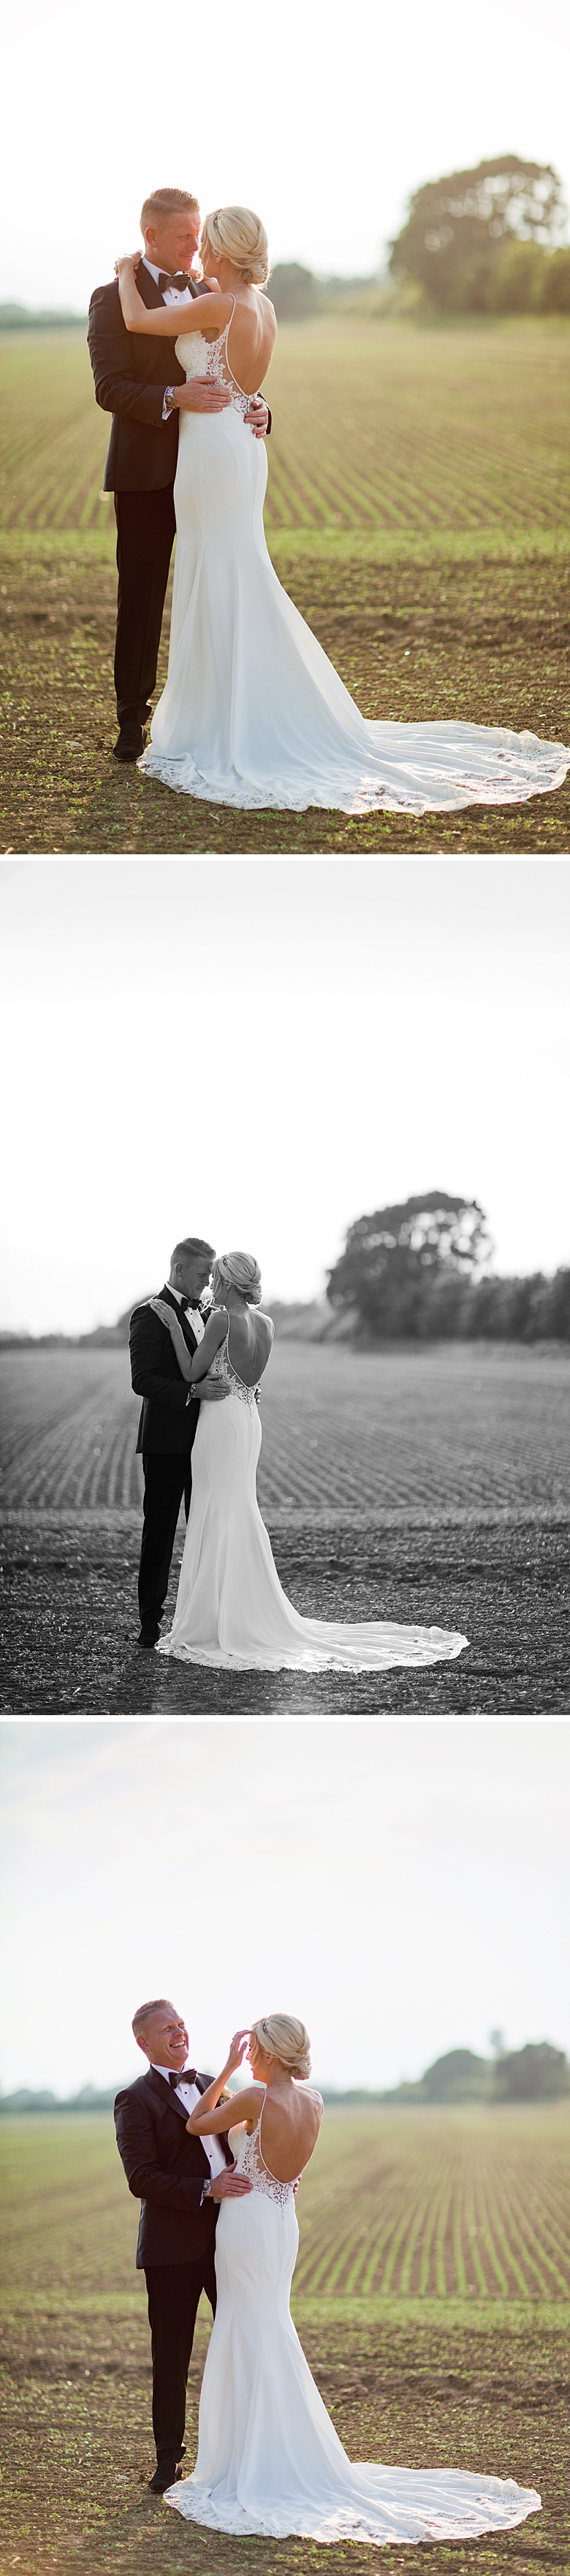 Southend Barns wedding day with the bride in Enzoani dress and groom in black tie from moss bros at golden hour having their evening couple portraits